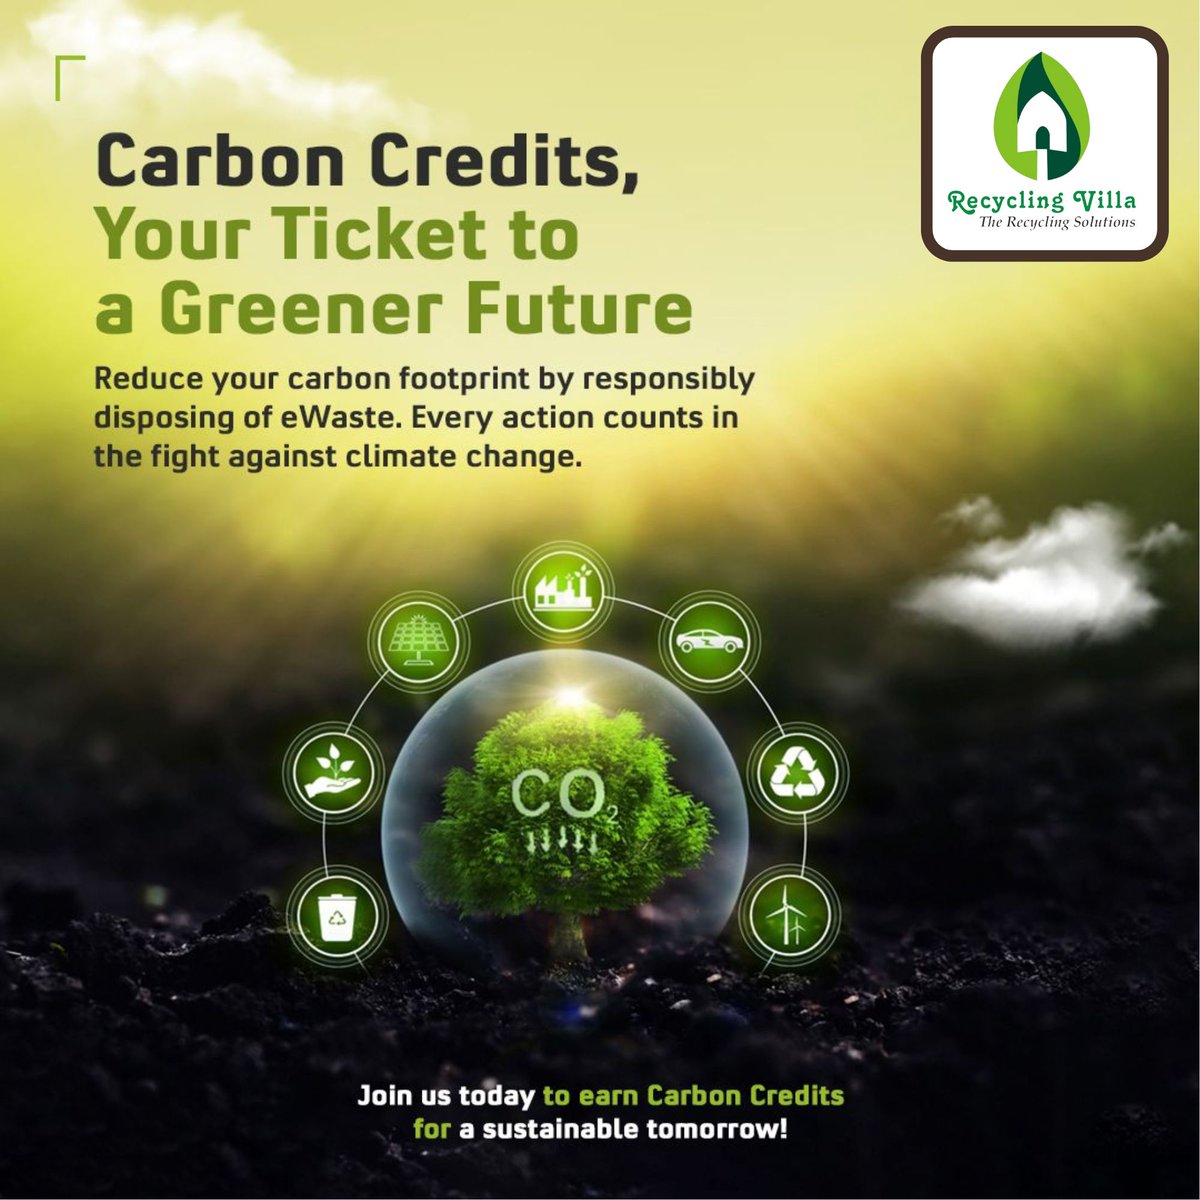 Did you know? Carbon credits help neutralize our carbon emissions, supporting eco-friendly initiatives worldwide. Take action, reduce your carbon footprint today! 🌍💡

#RecyclingVilla #CarbonCredits #Sustainability #EwasteIndia #ElectronicWaste #ReduceReuseRecycle #EcoFriendly